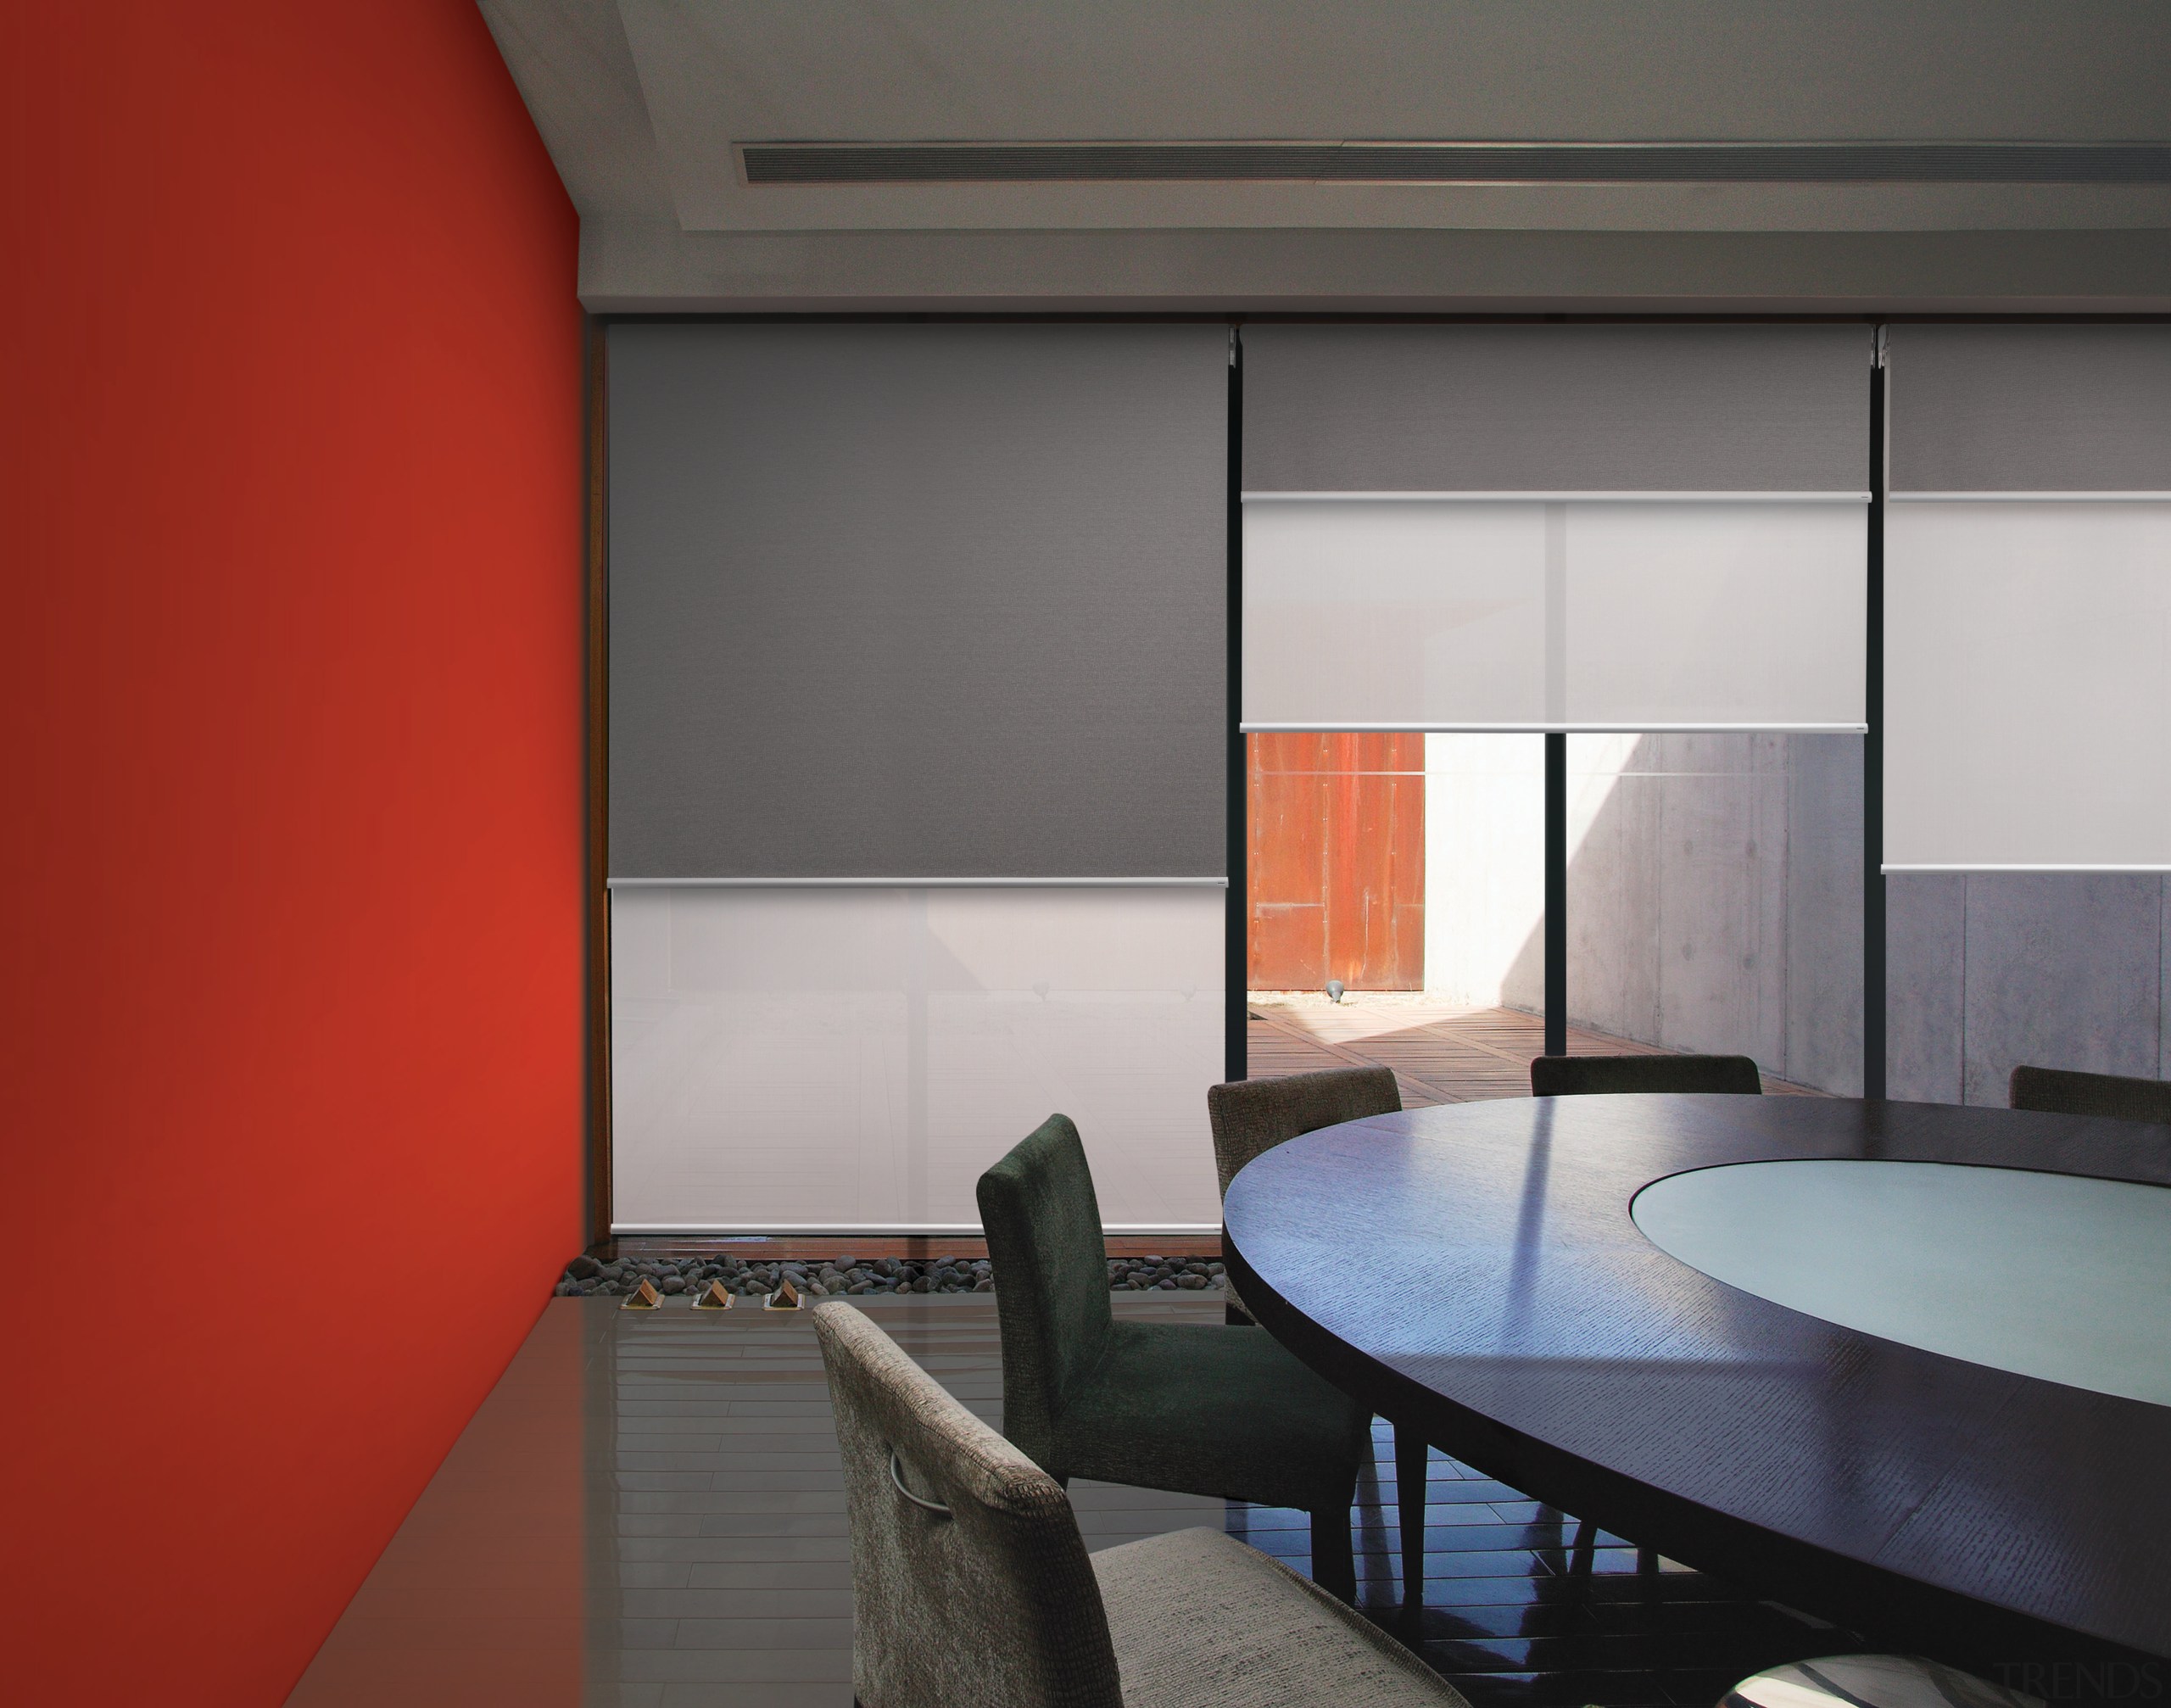 Interior view of an office area which features architecture, ceiling, daylighting, house, interior design, shade, table, window, window covering, gray, red